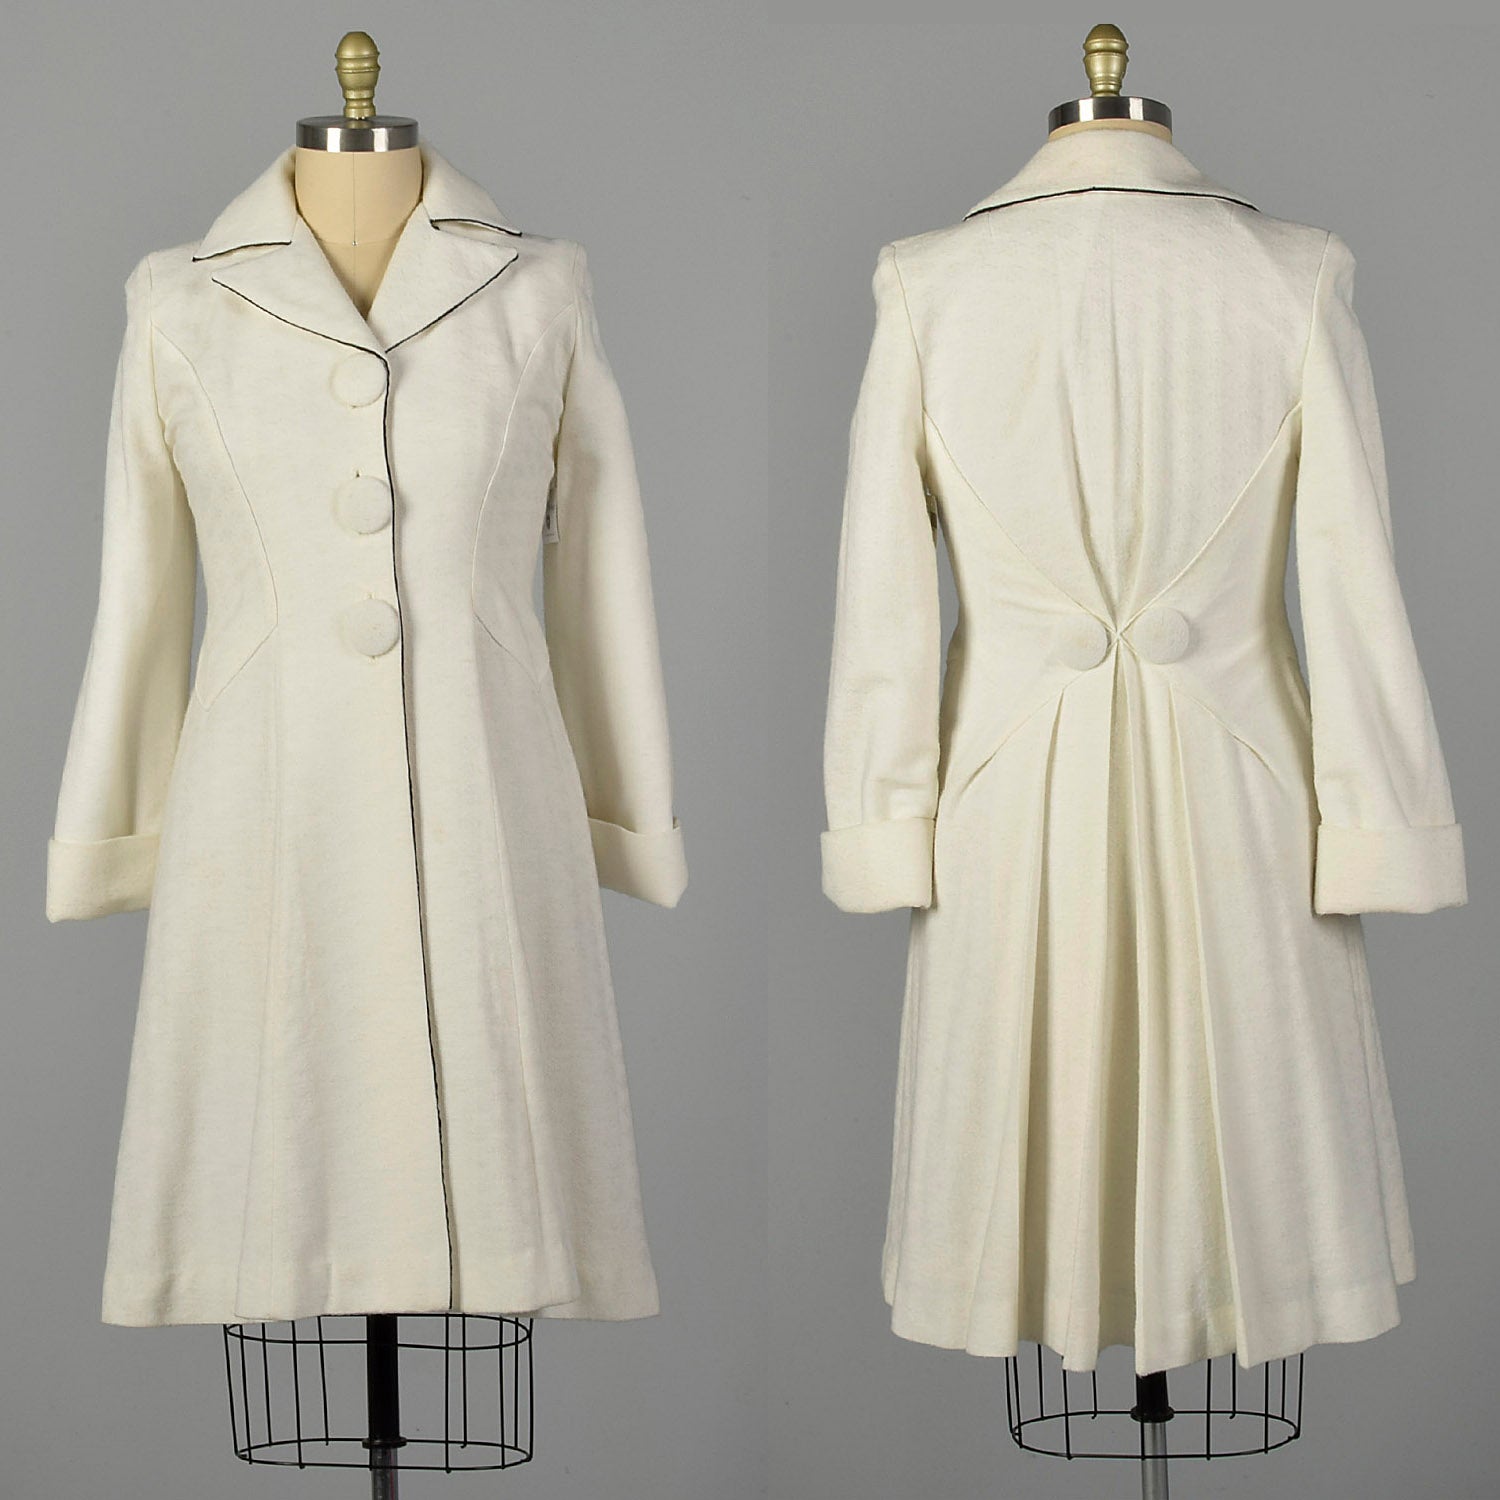 Medium 1960s White Knit Princess Coat with Huge Buttons Autumn Outerwear